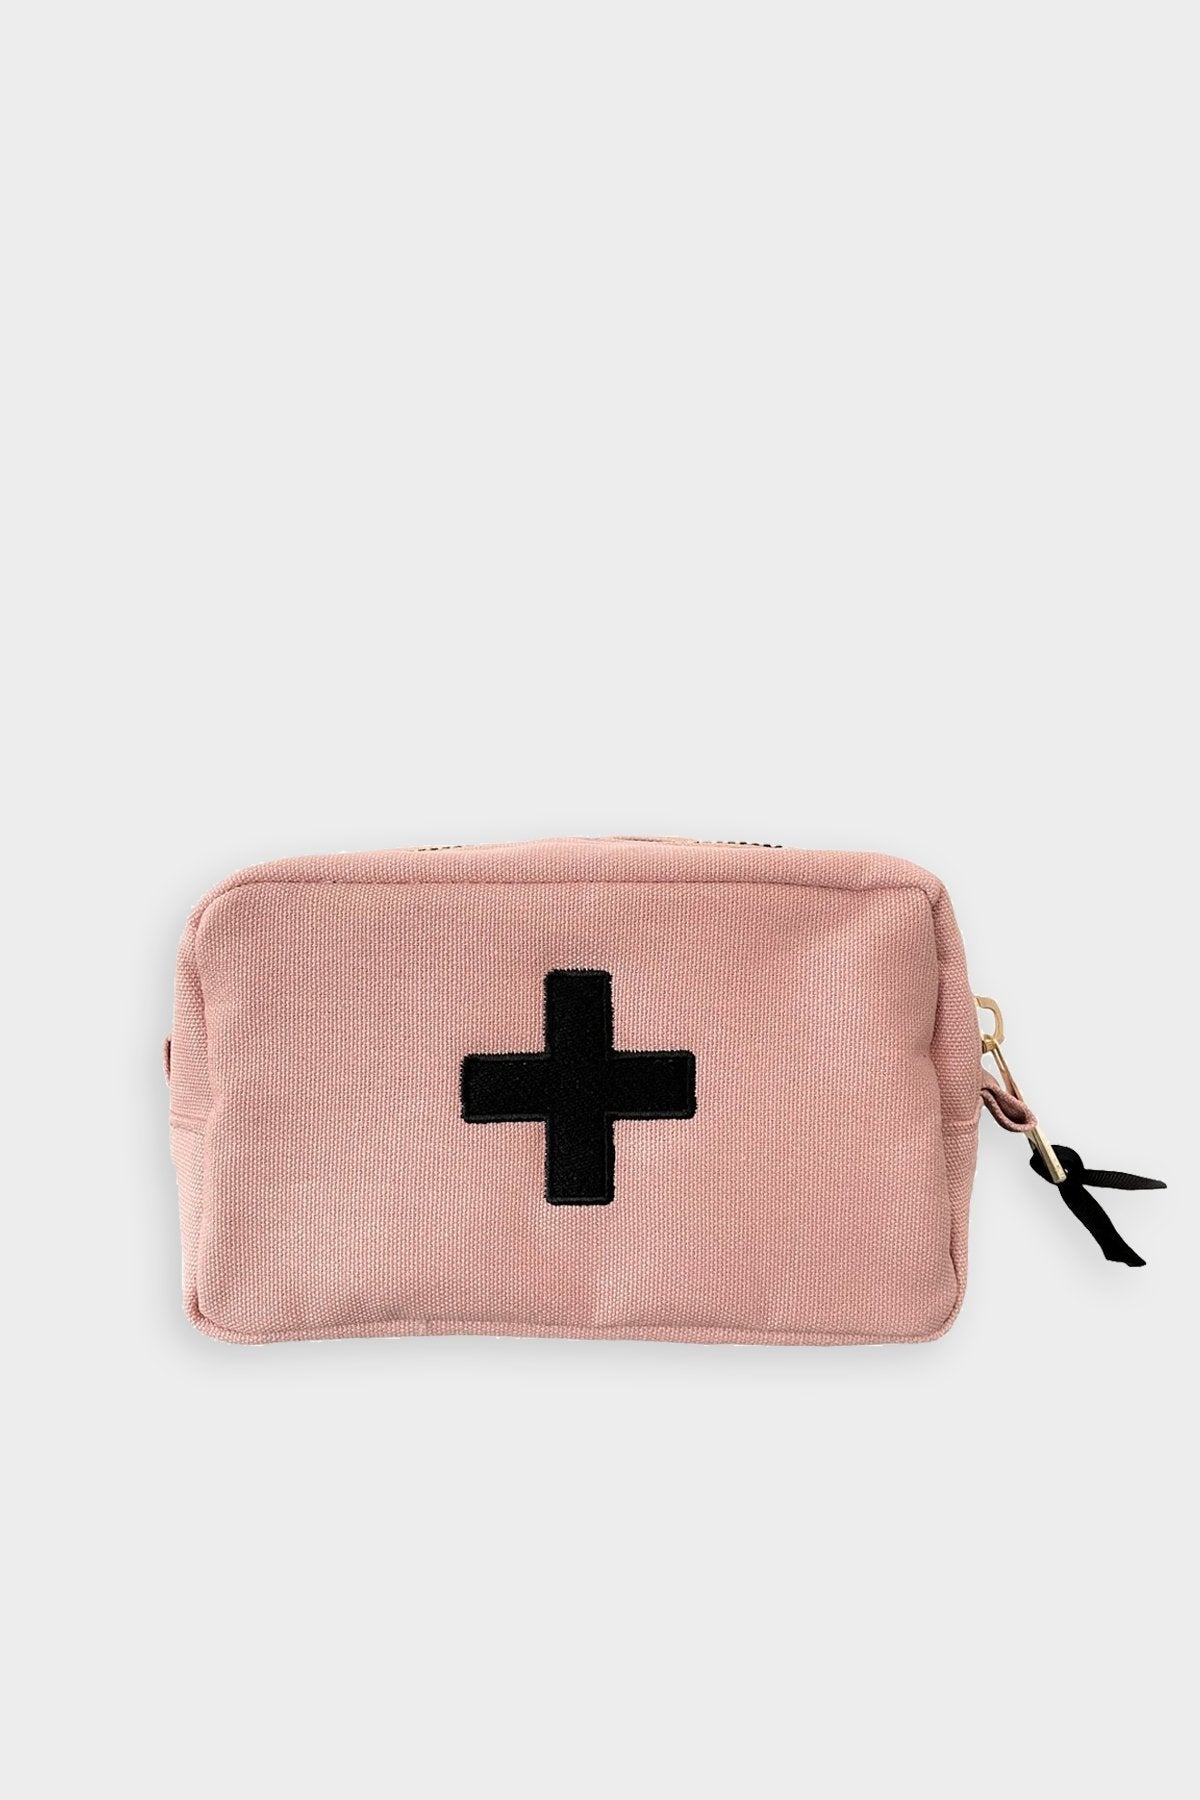 Case with Cross in Pink - shop-olivia.com